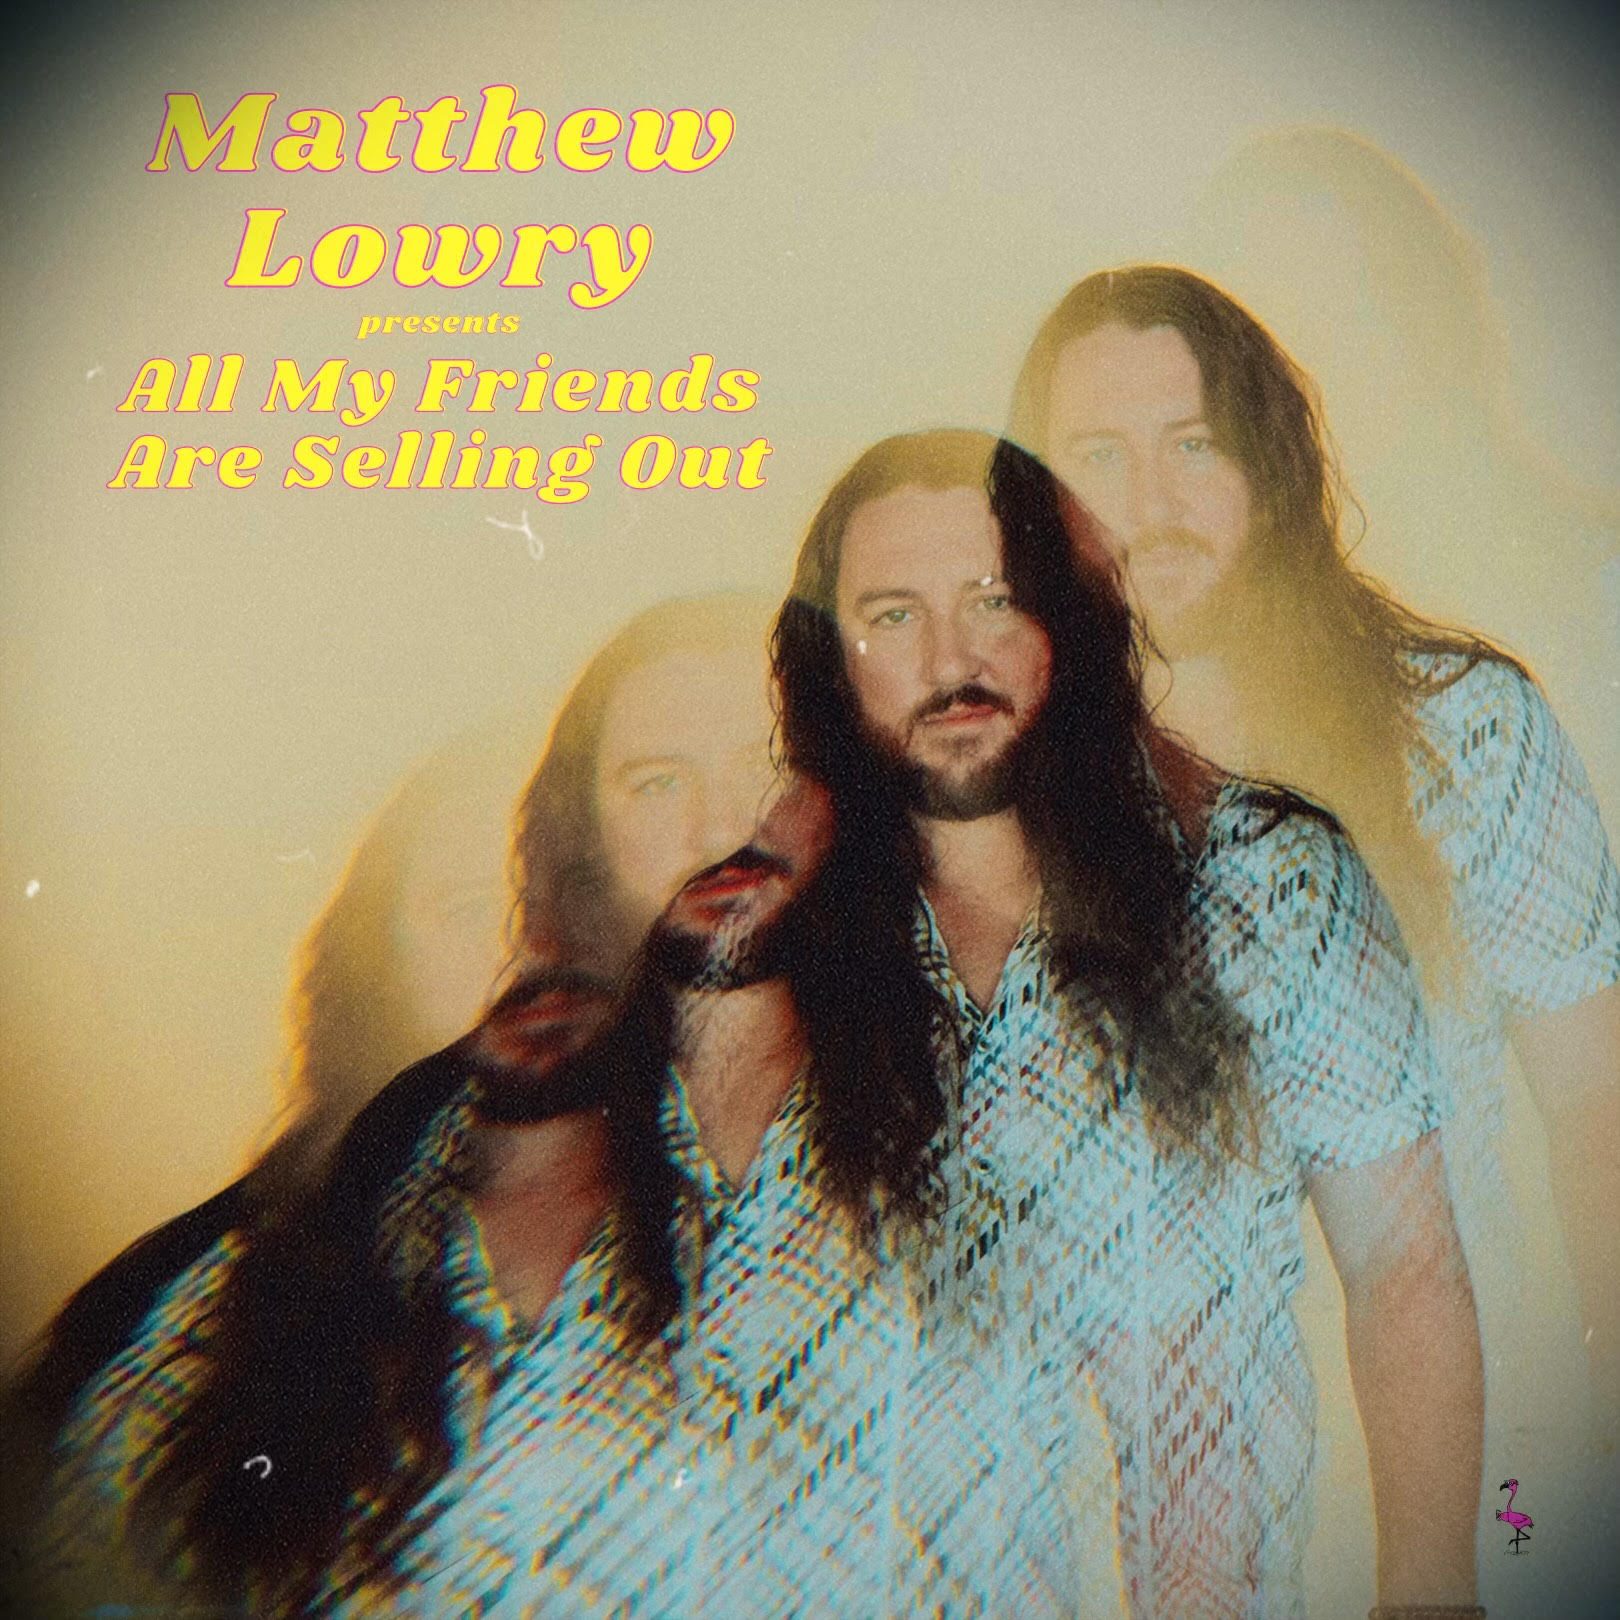 Matthew Lowry “All My Friends Are Selling Out” single artwork